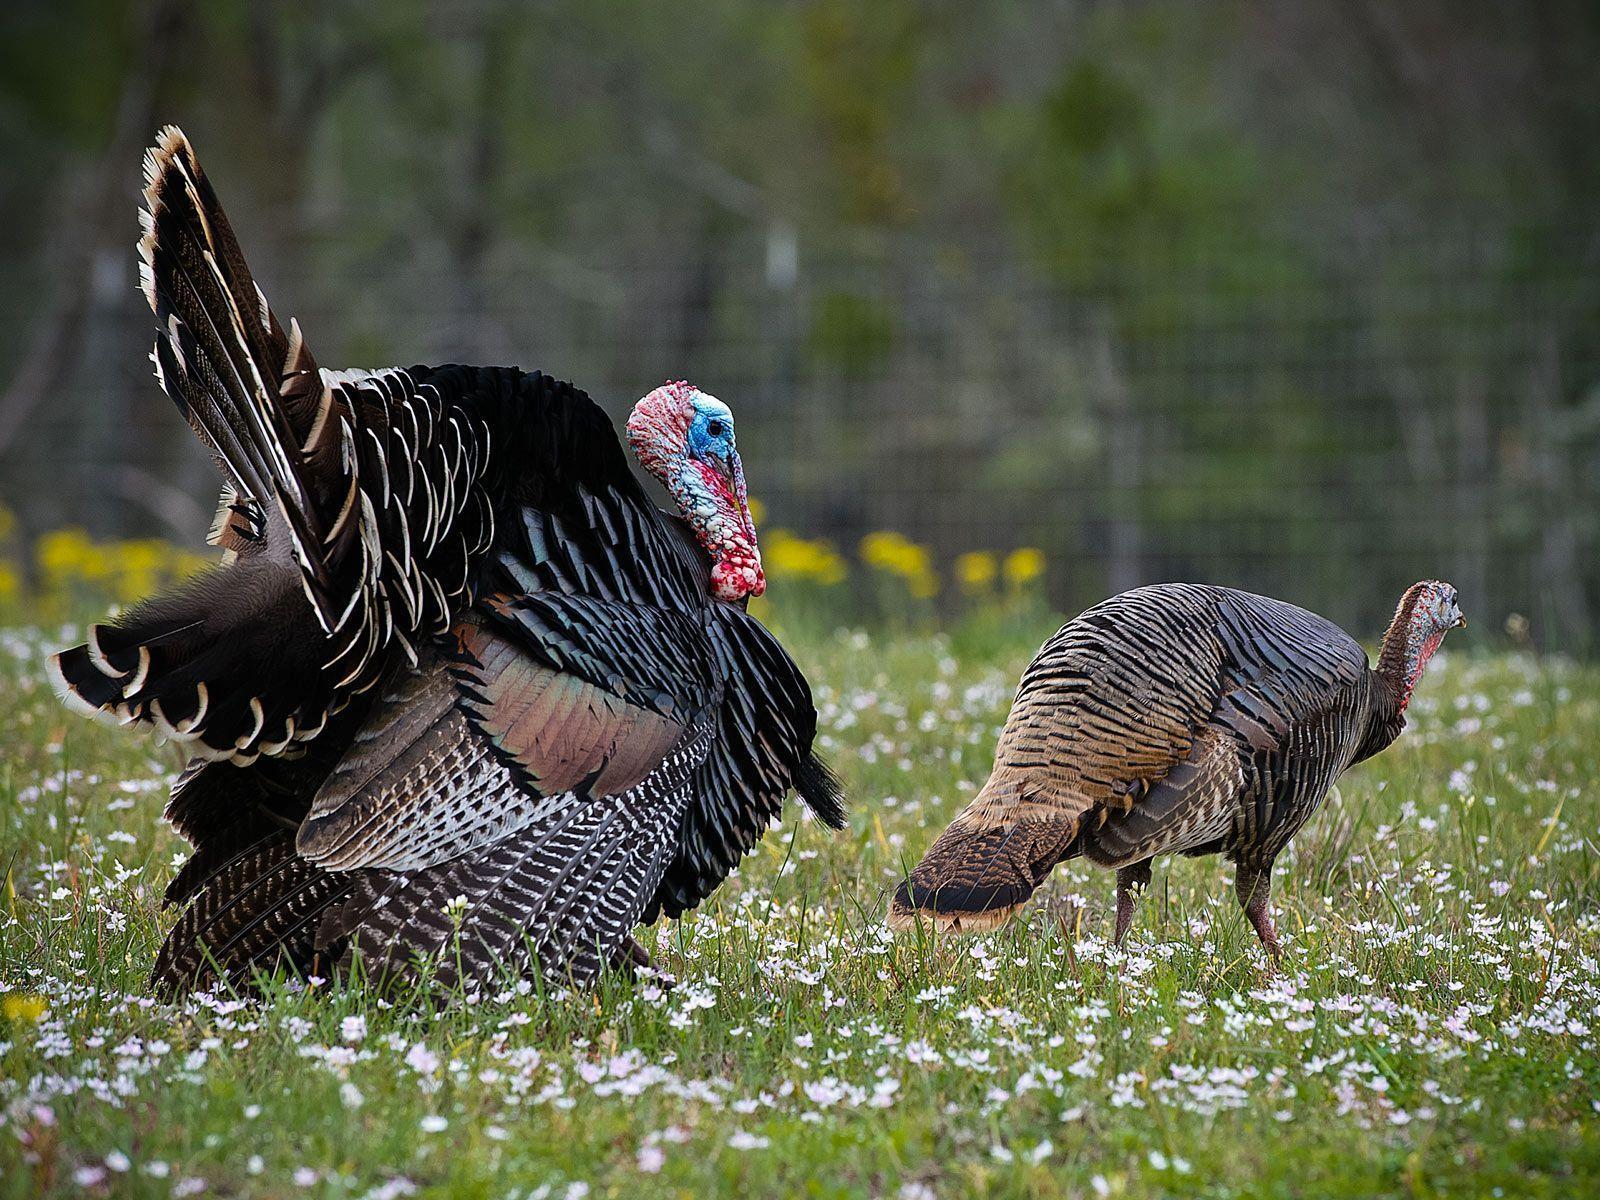 Great Turkey Desktop Wallpaper in the world Check it out now 